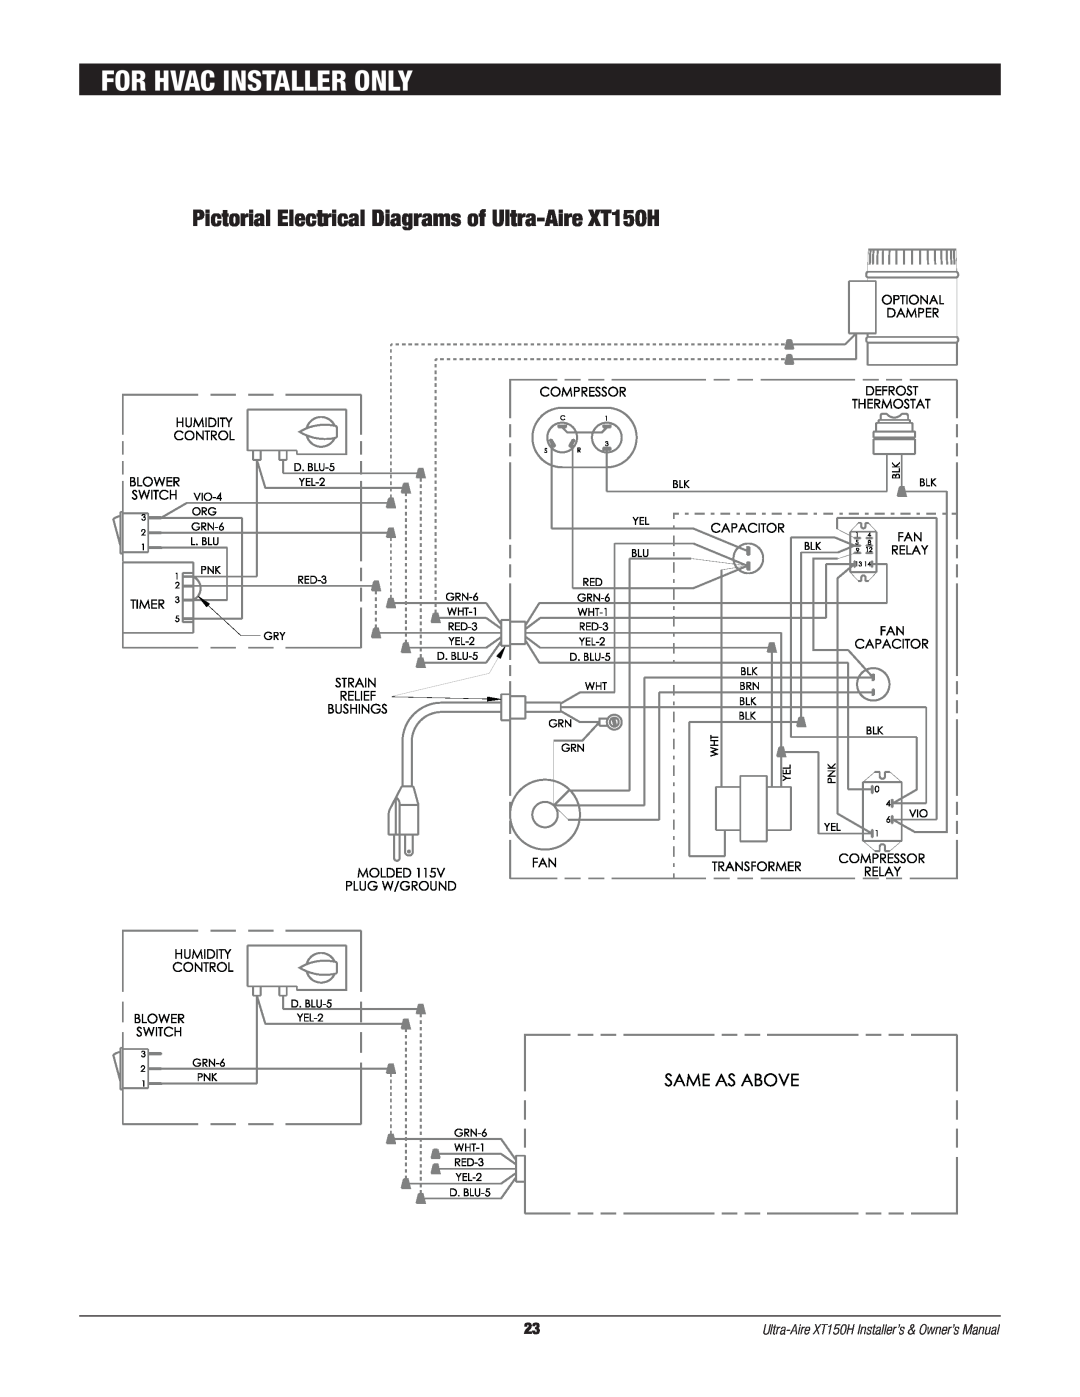 Therma-Stor Products Group owner manual Pictorial Electrical Diagrams of Ultra-AireXT150H, For Hvac Installer Only 